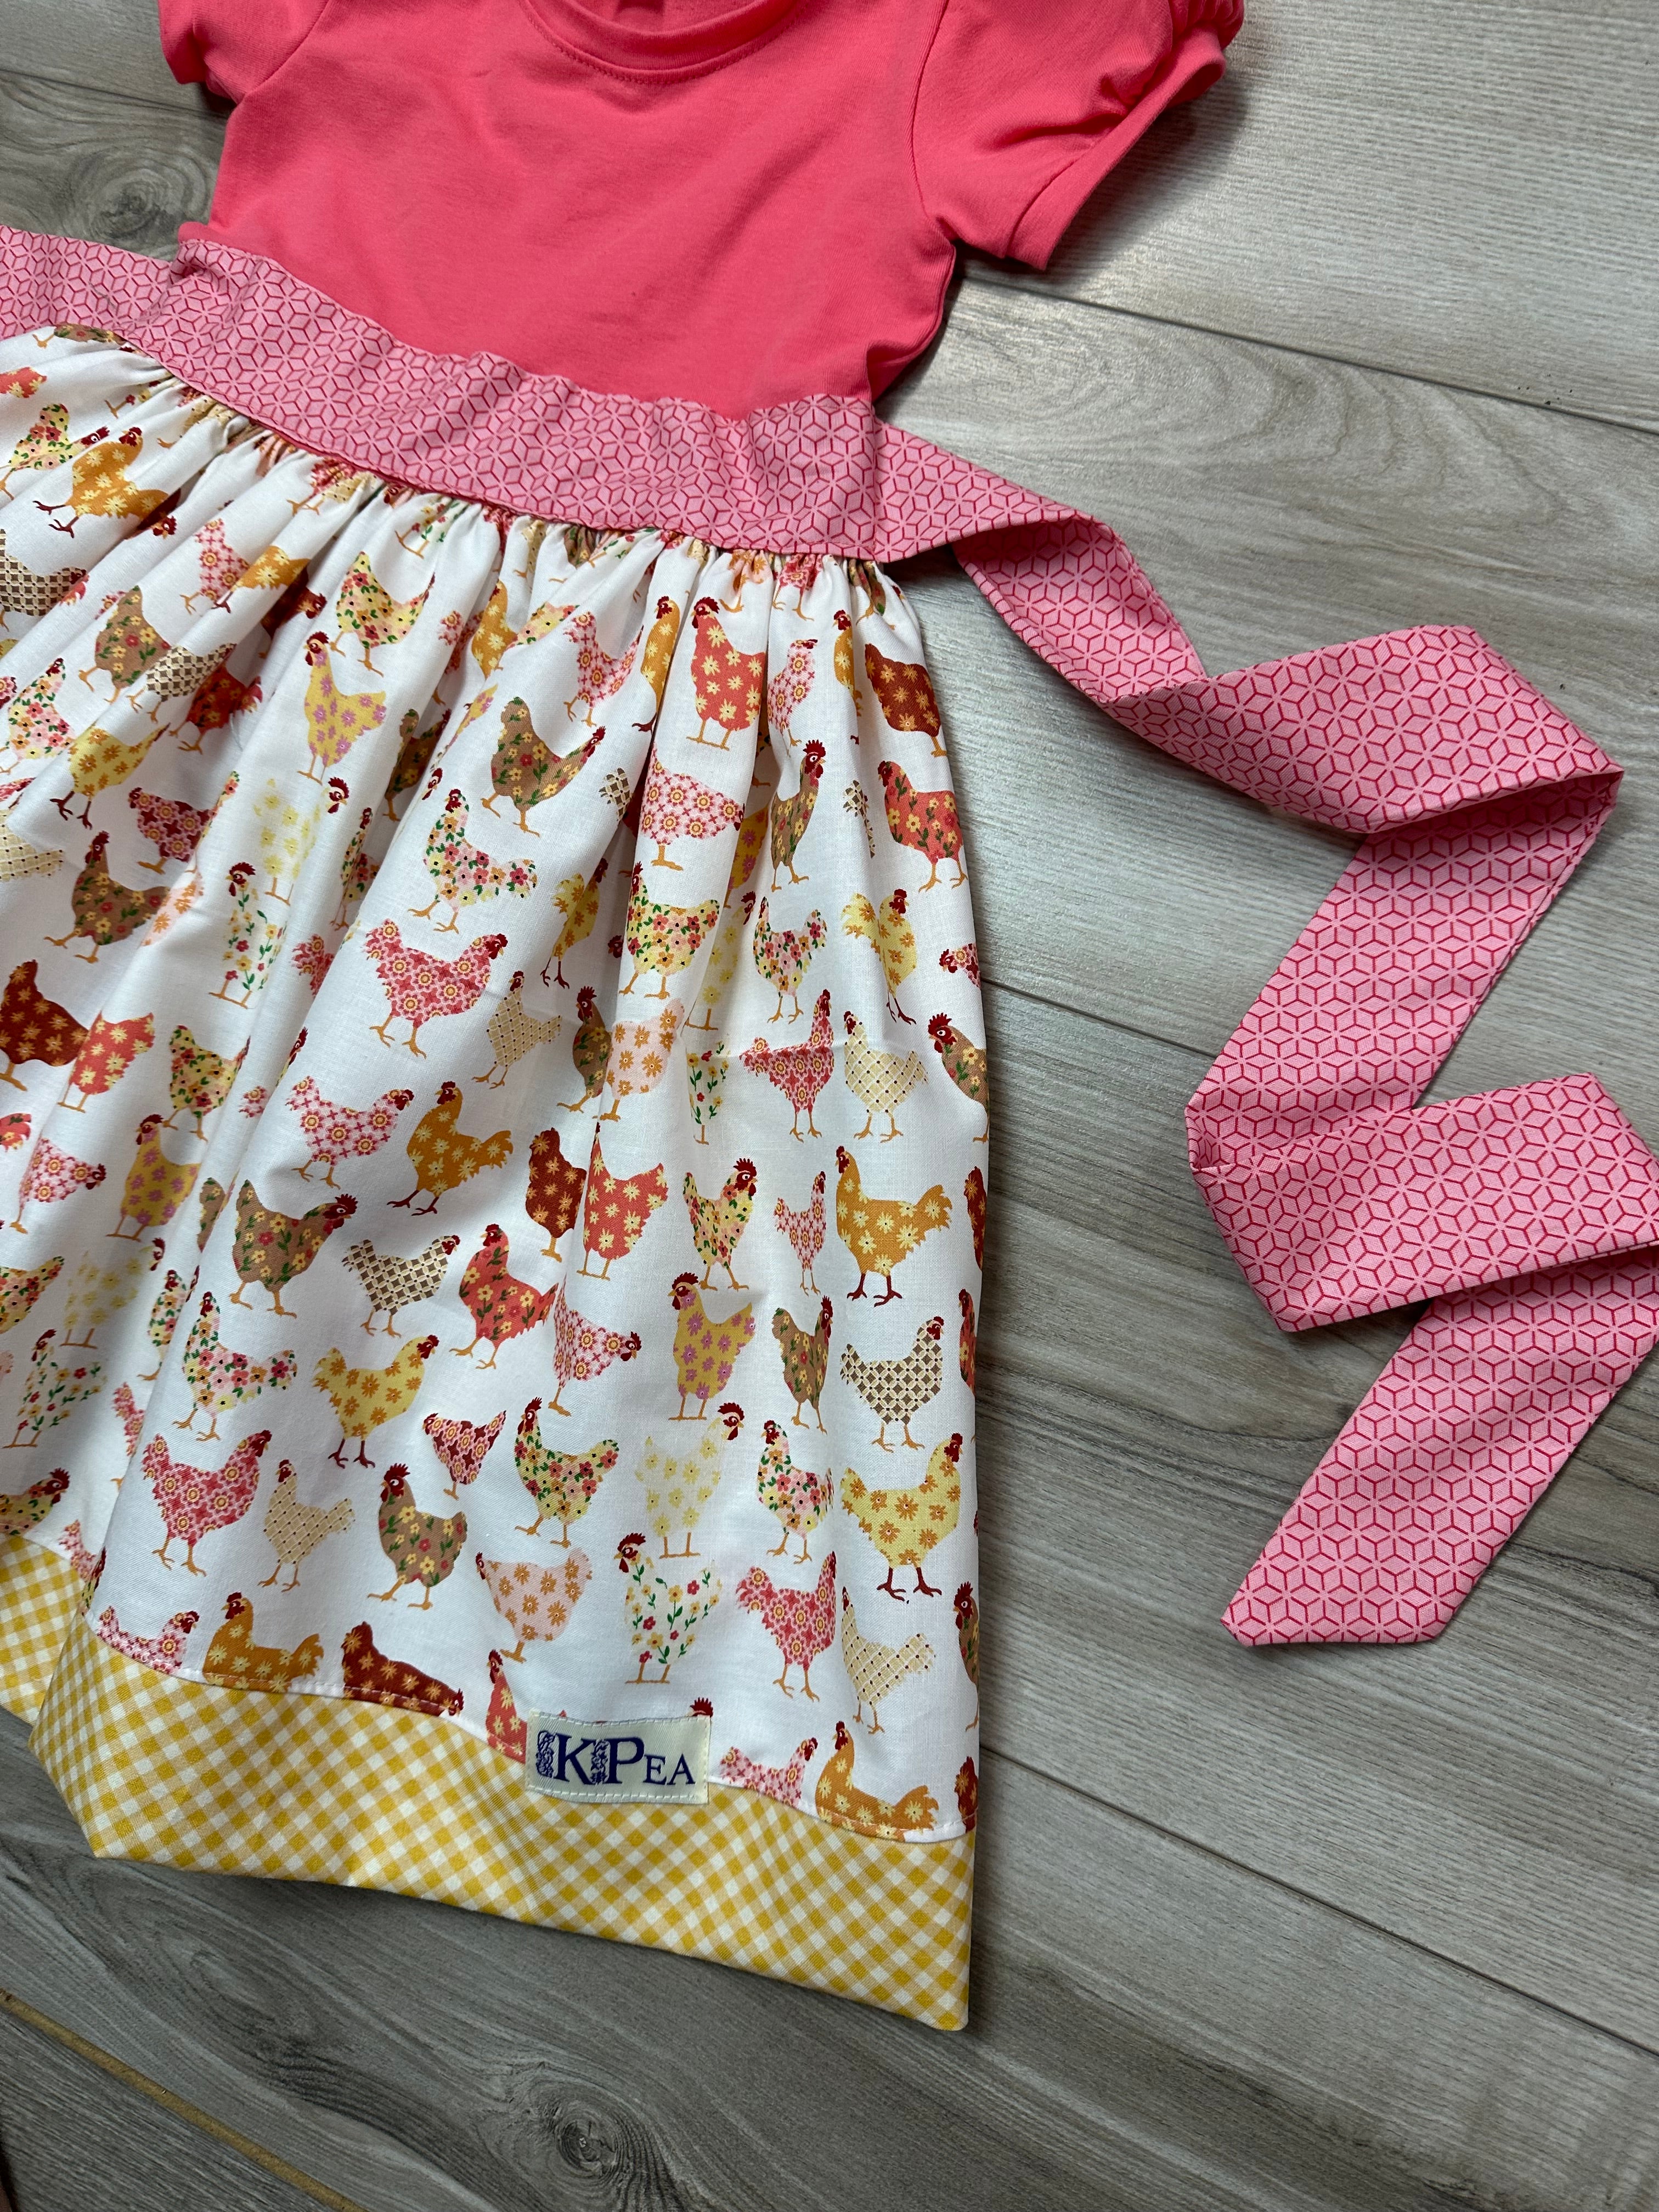 Chicks in the Coop Twirl dress (ships in 2 weeks)